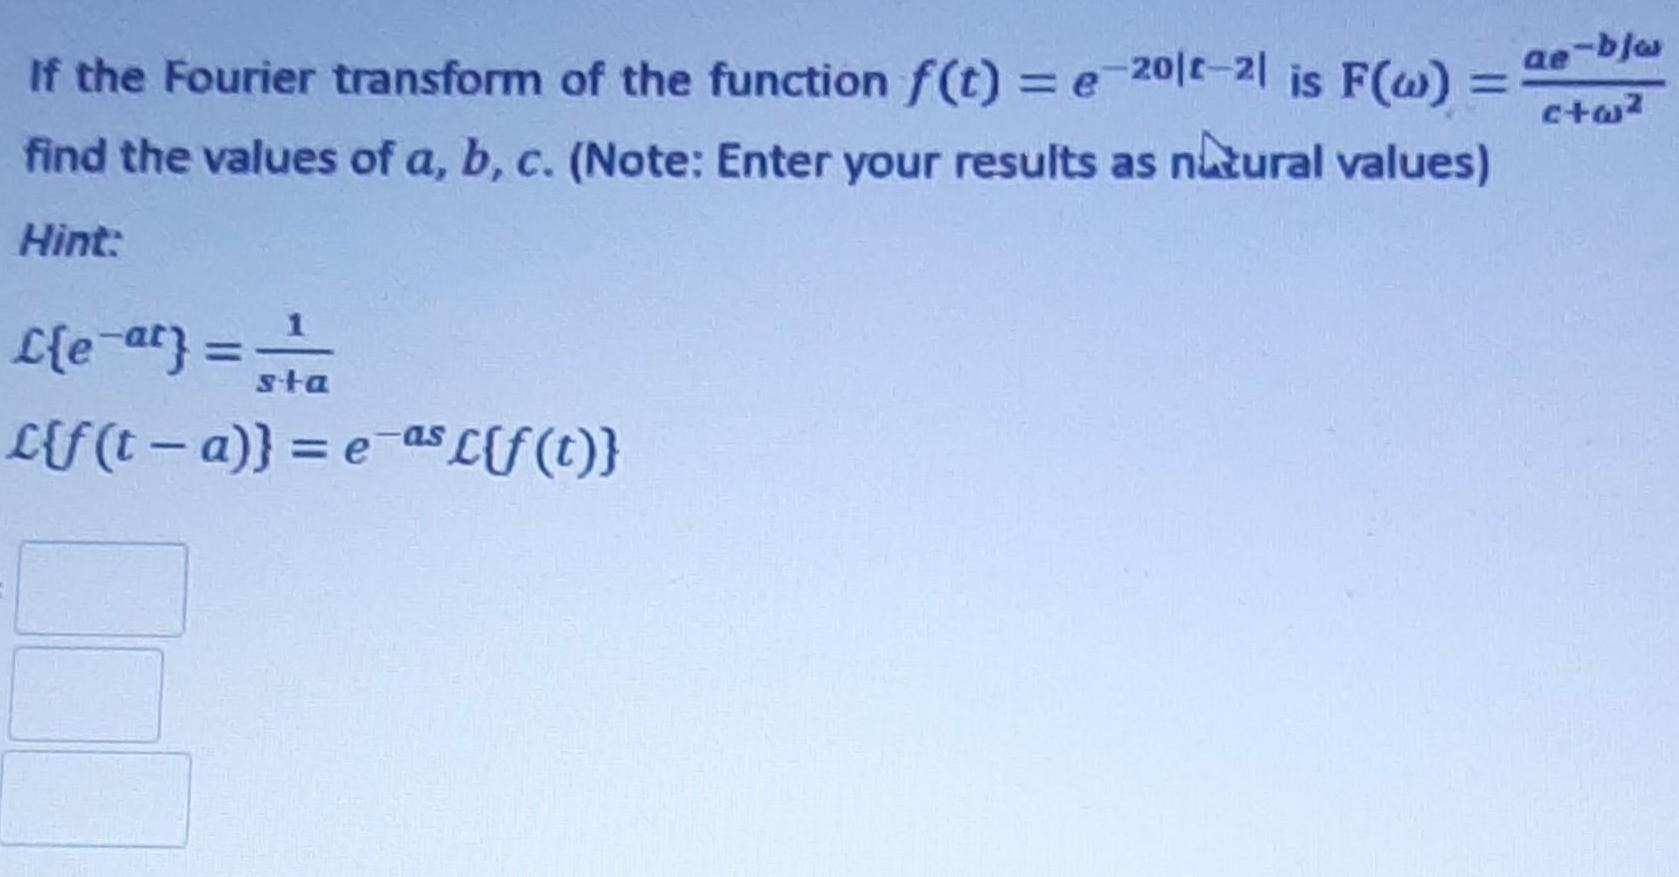 ae If the Fourier transform of the function f(t) = e-201-21 is F(w) = find the values of a, b, c. (Note: